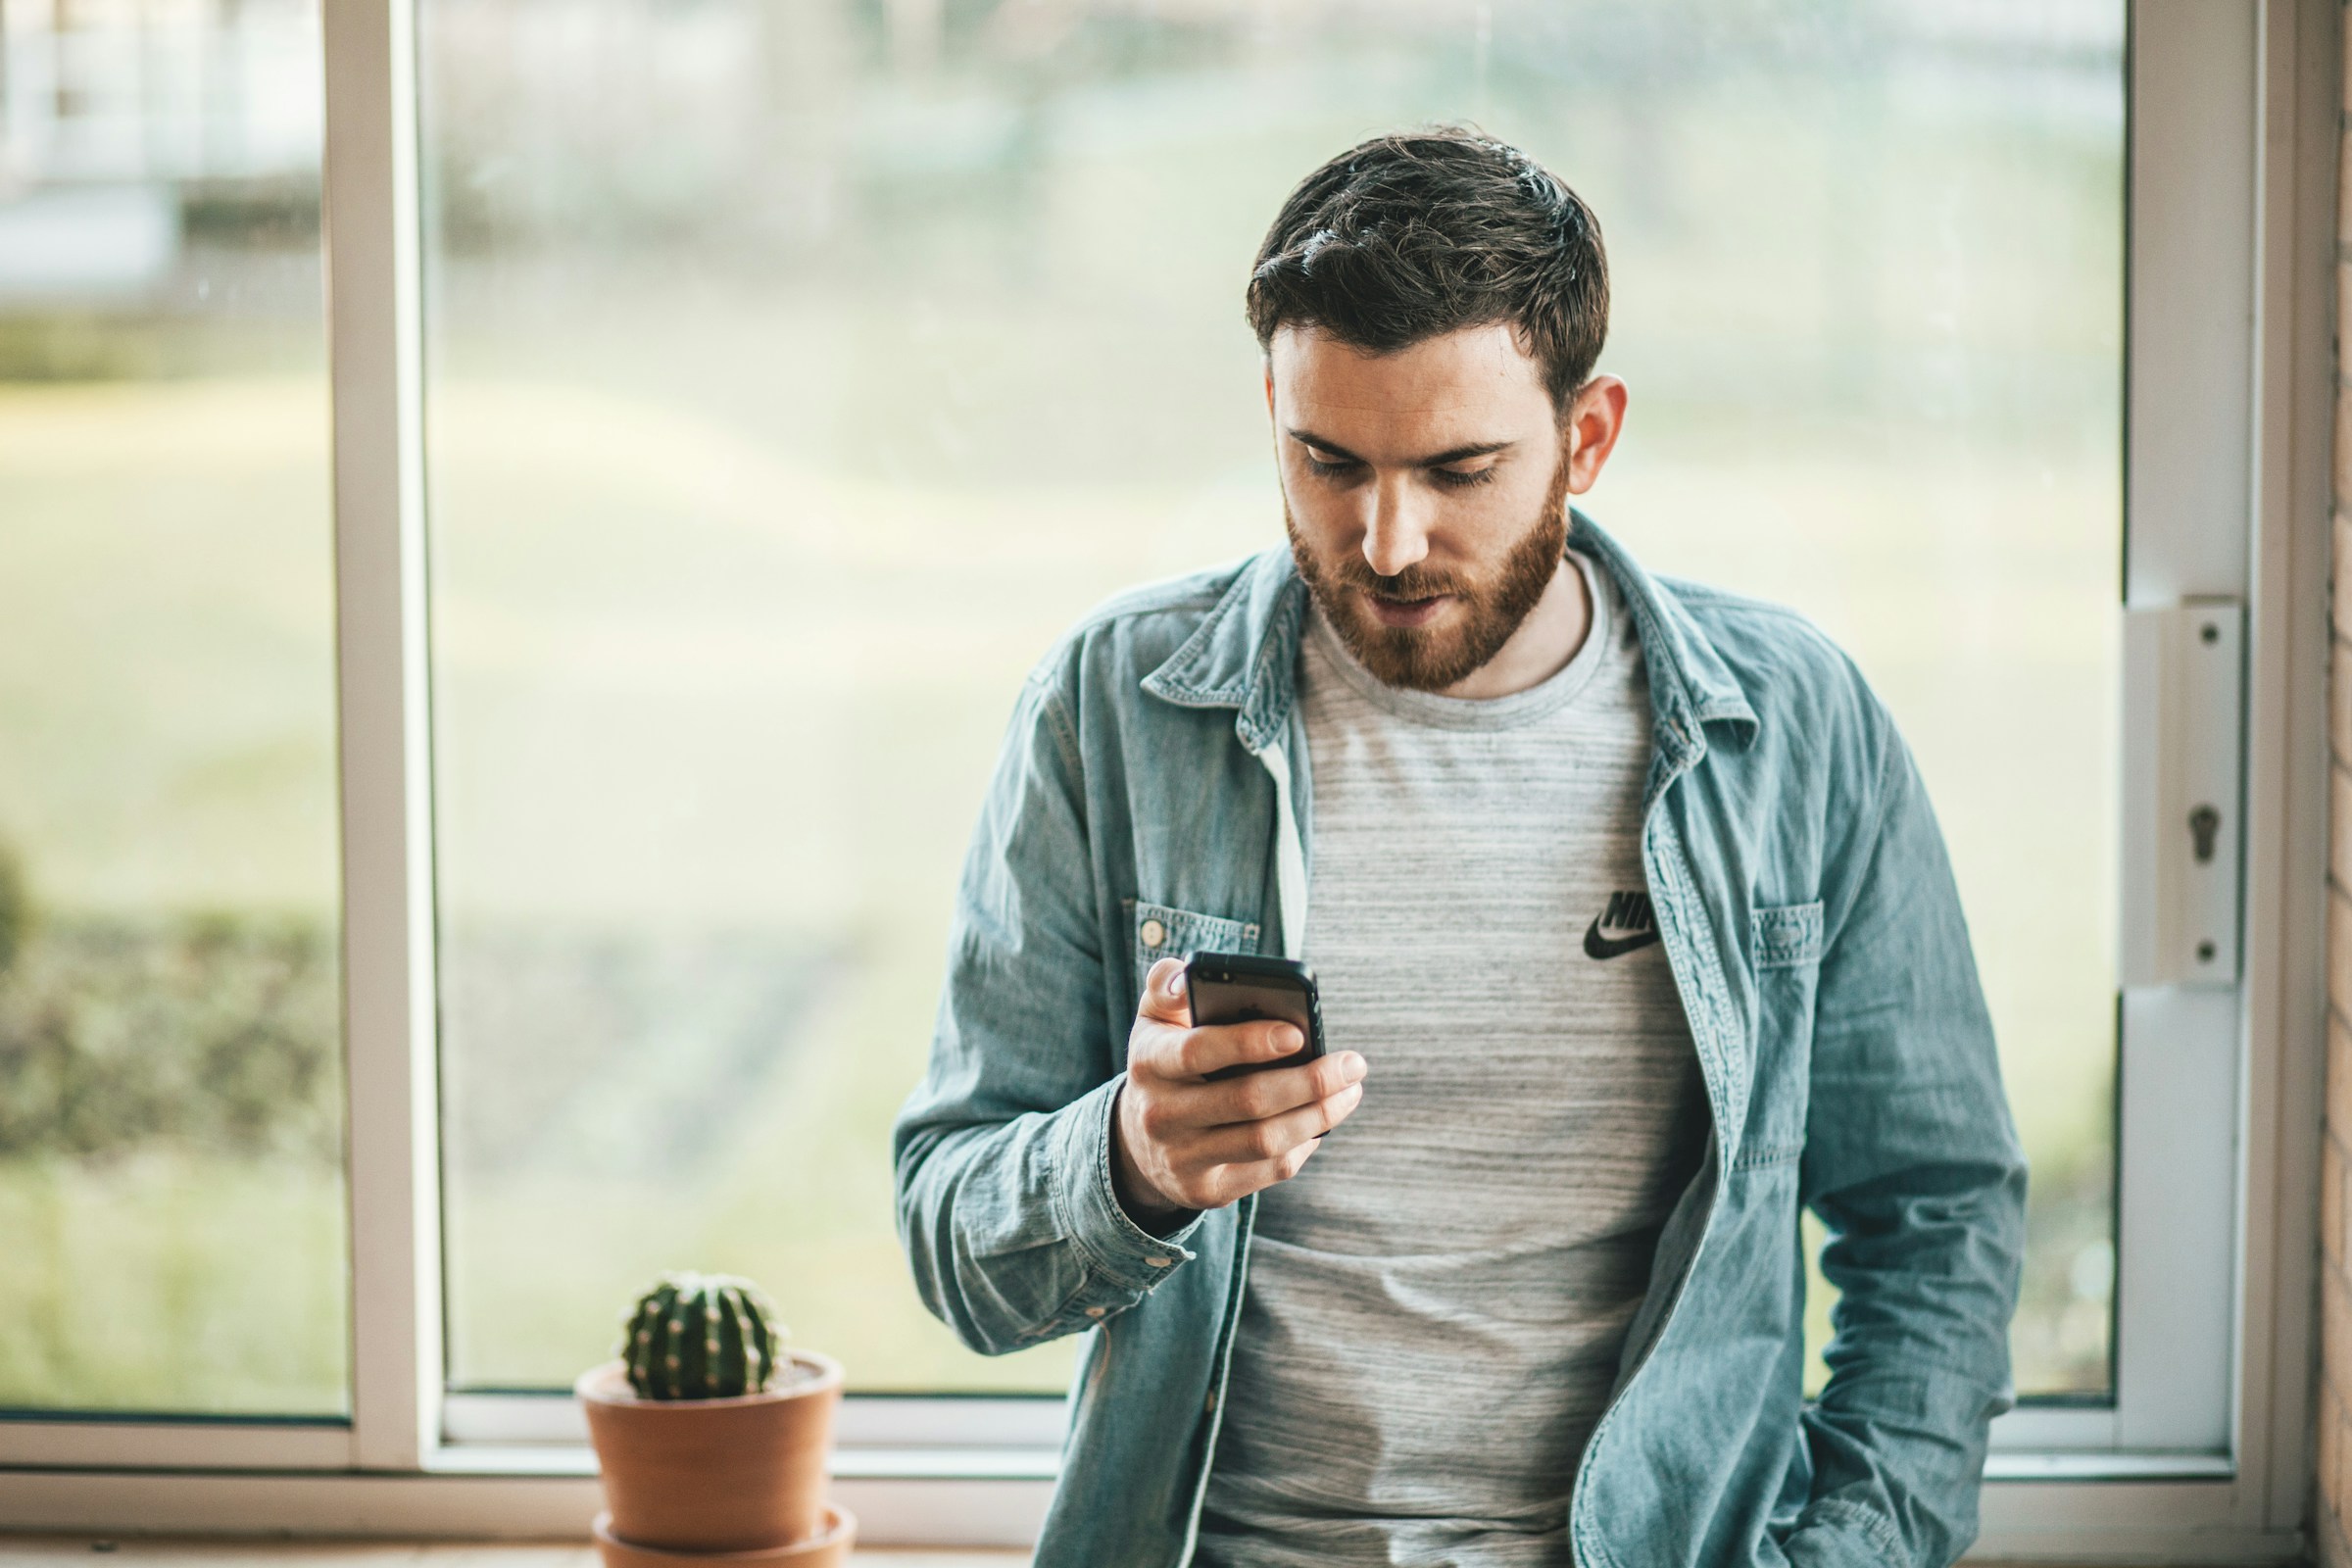 A man holding a smart phone in front of a window | Source: Pexels